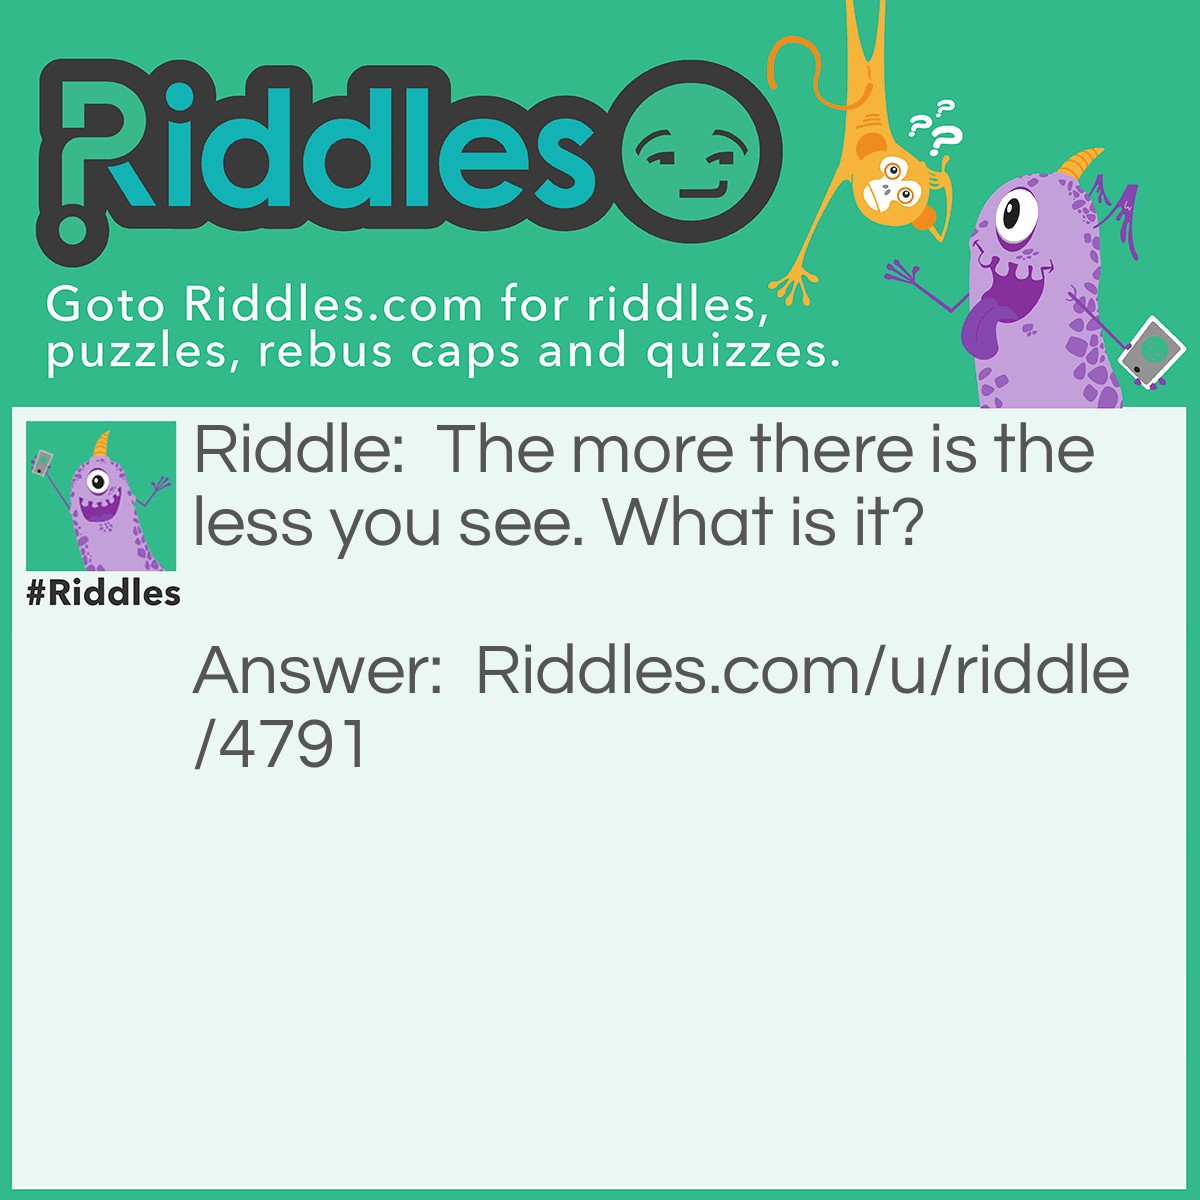 Riddle: The more there is the less you see. What is it? Answer: Darkness.